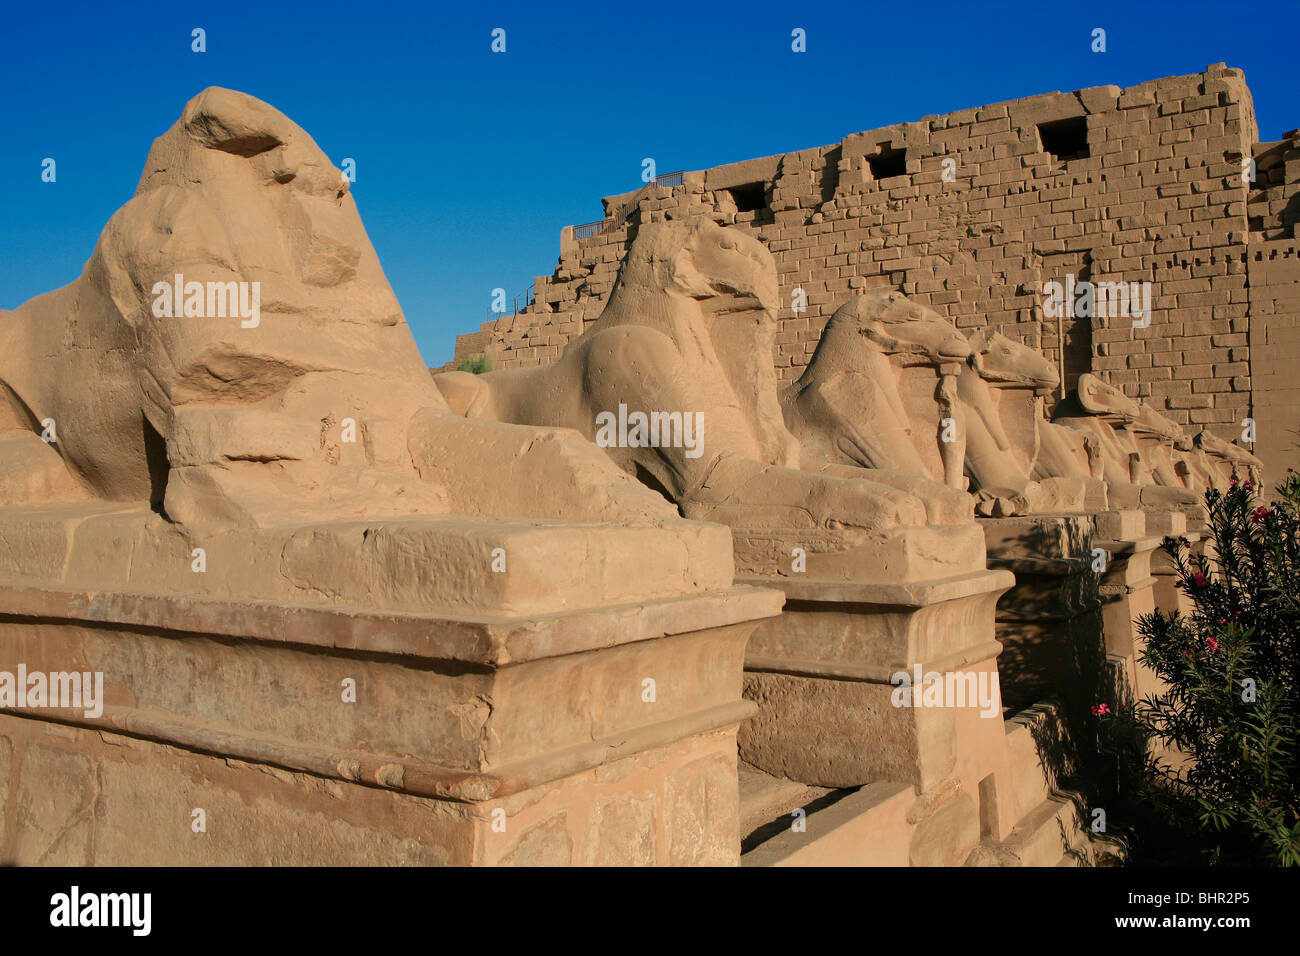 Avenue of ram-headed sphinxes at the main entrance of Karnak Temple in Luxor, Egypt Stock Photo